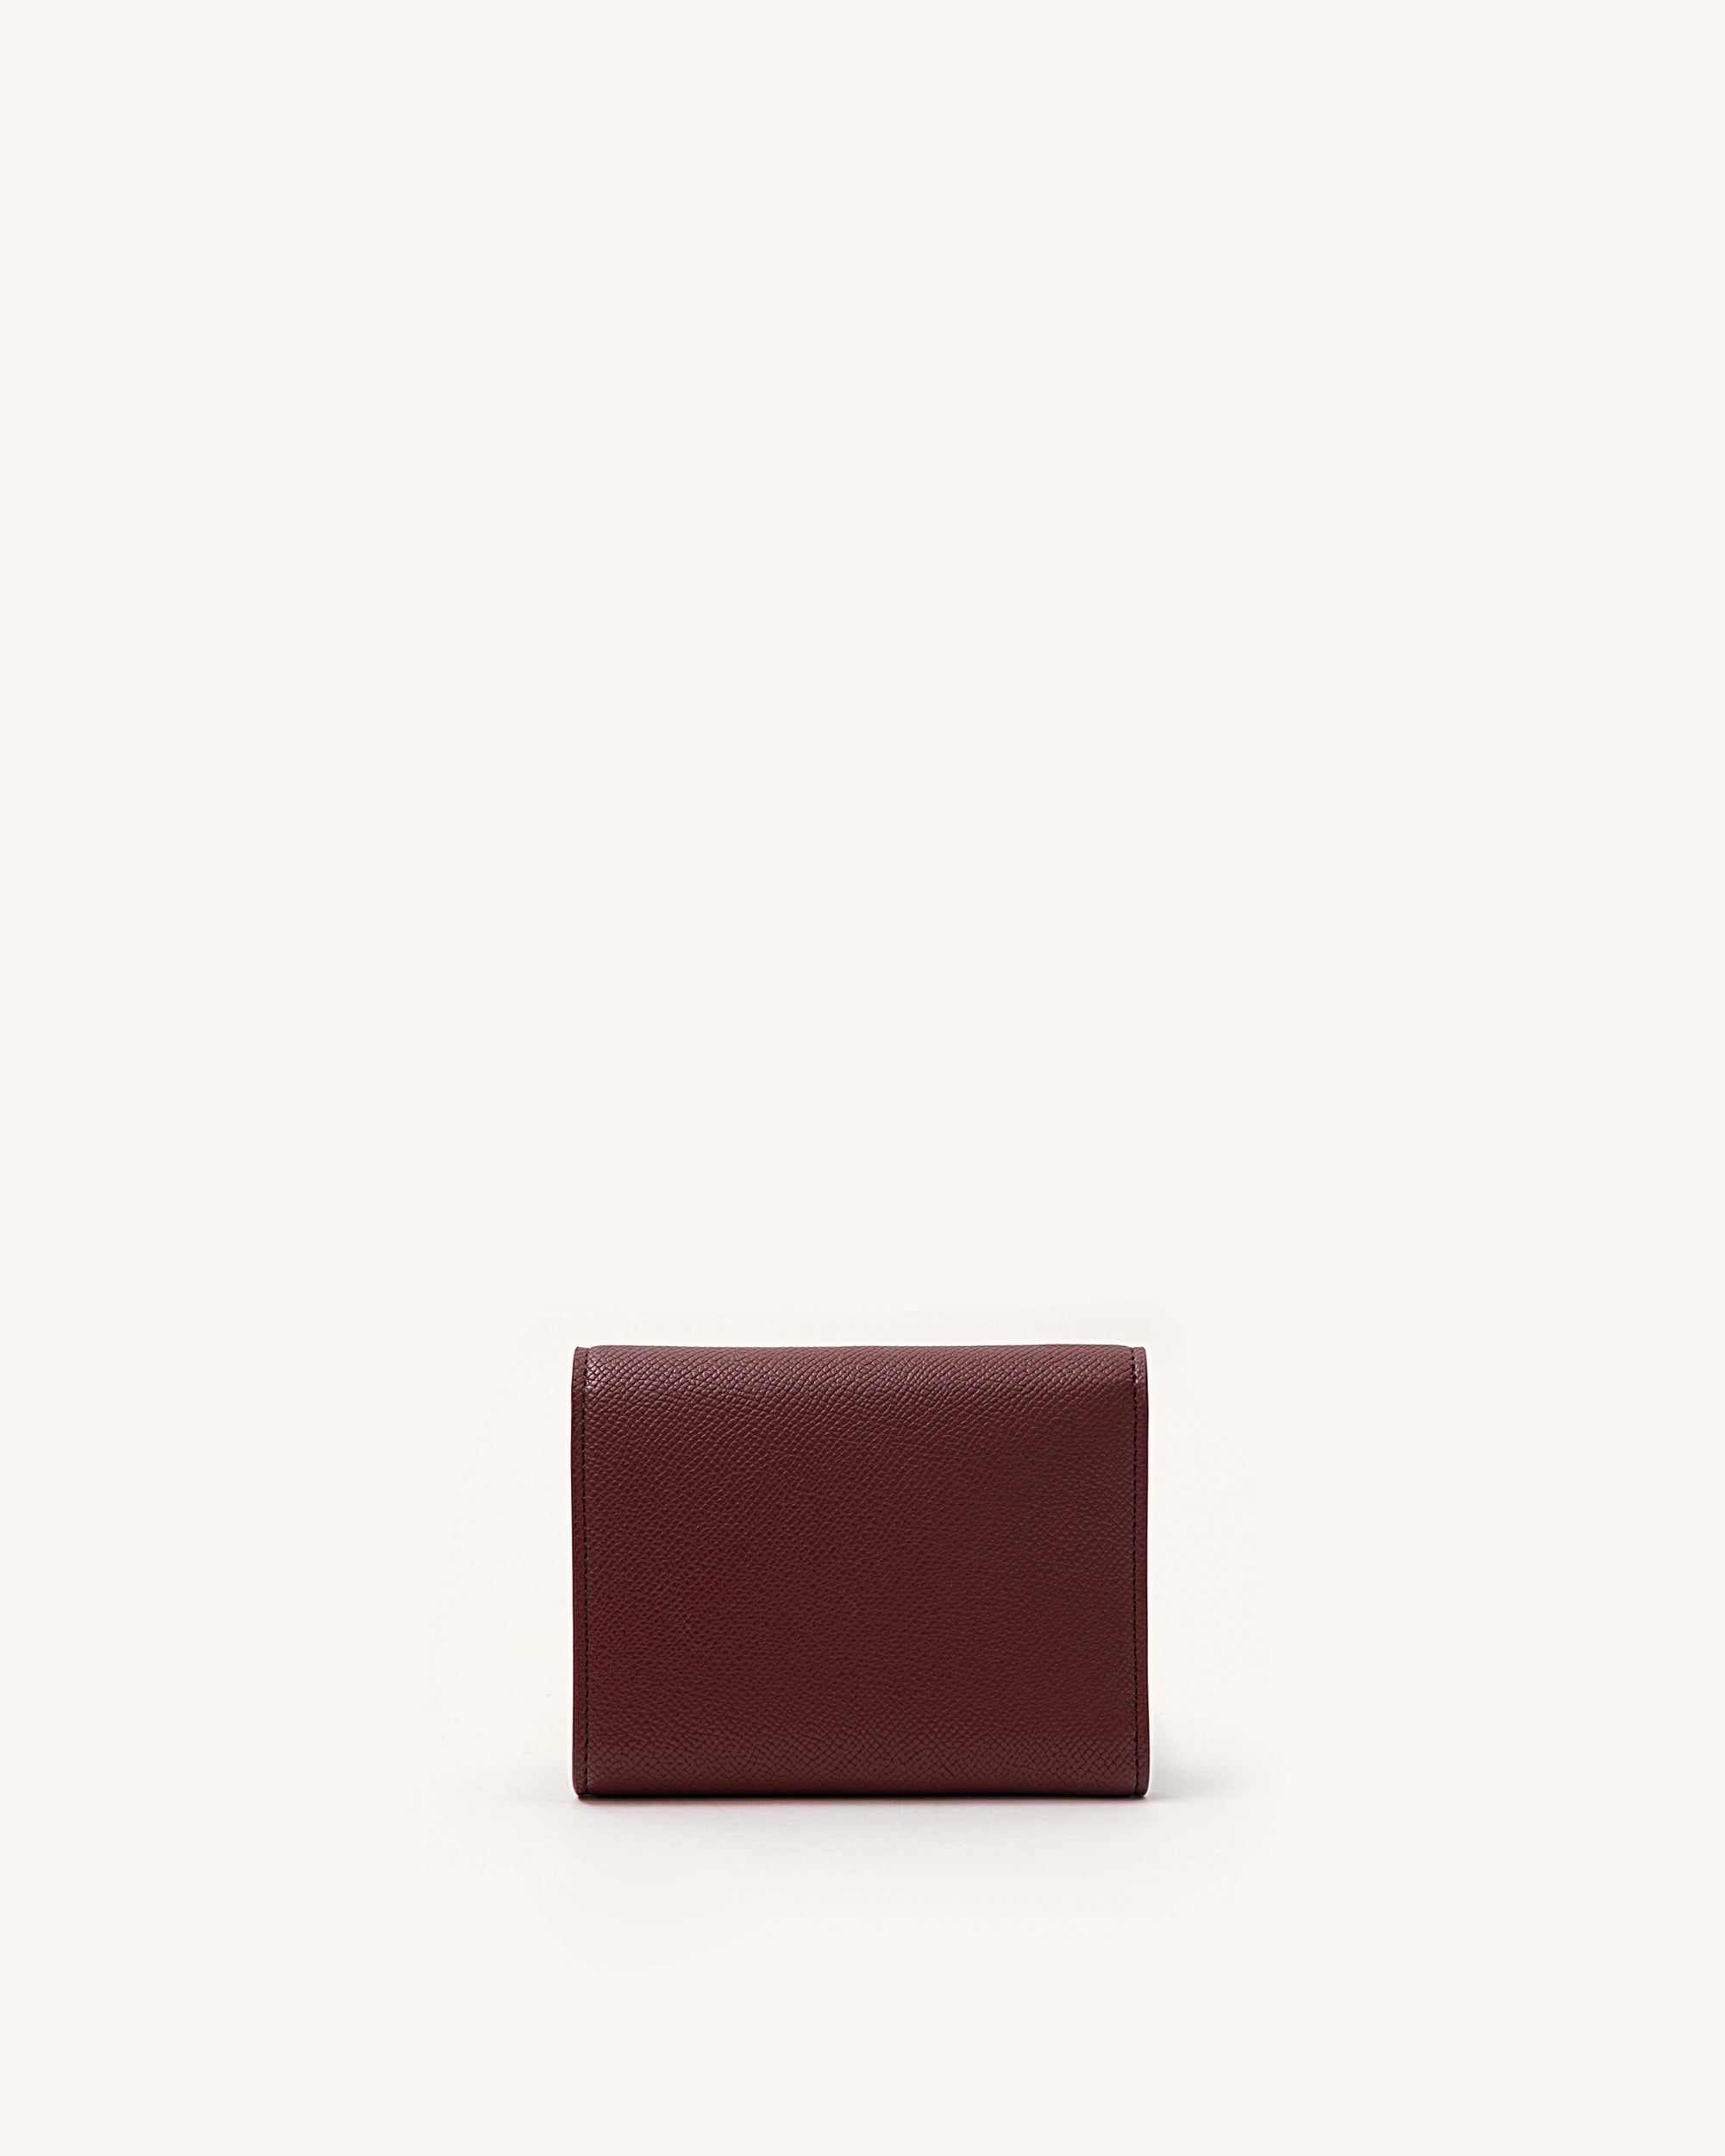 Grainy Leather TB Card Case in Dusky Pink - Women